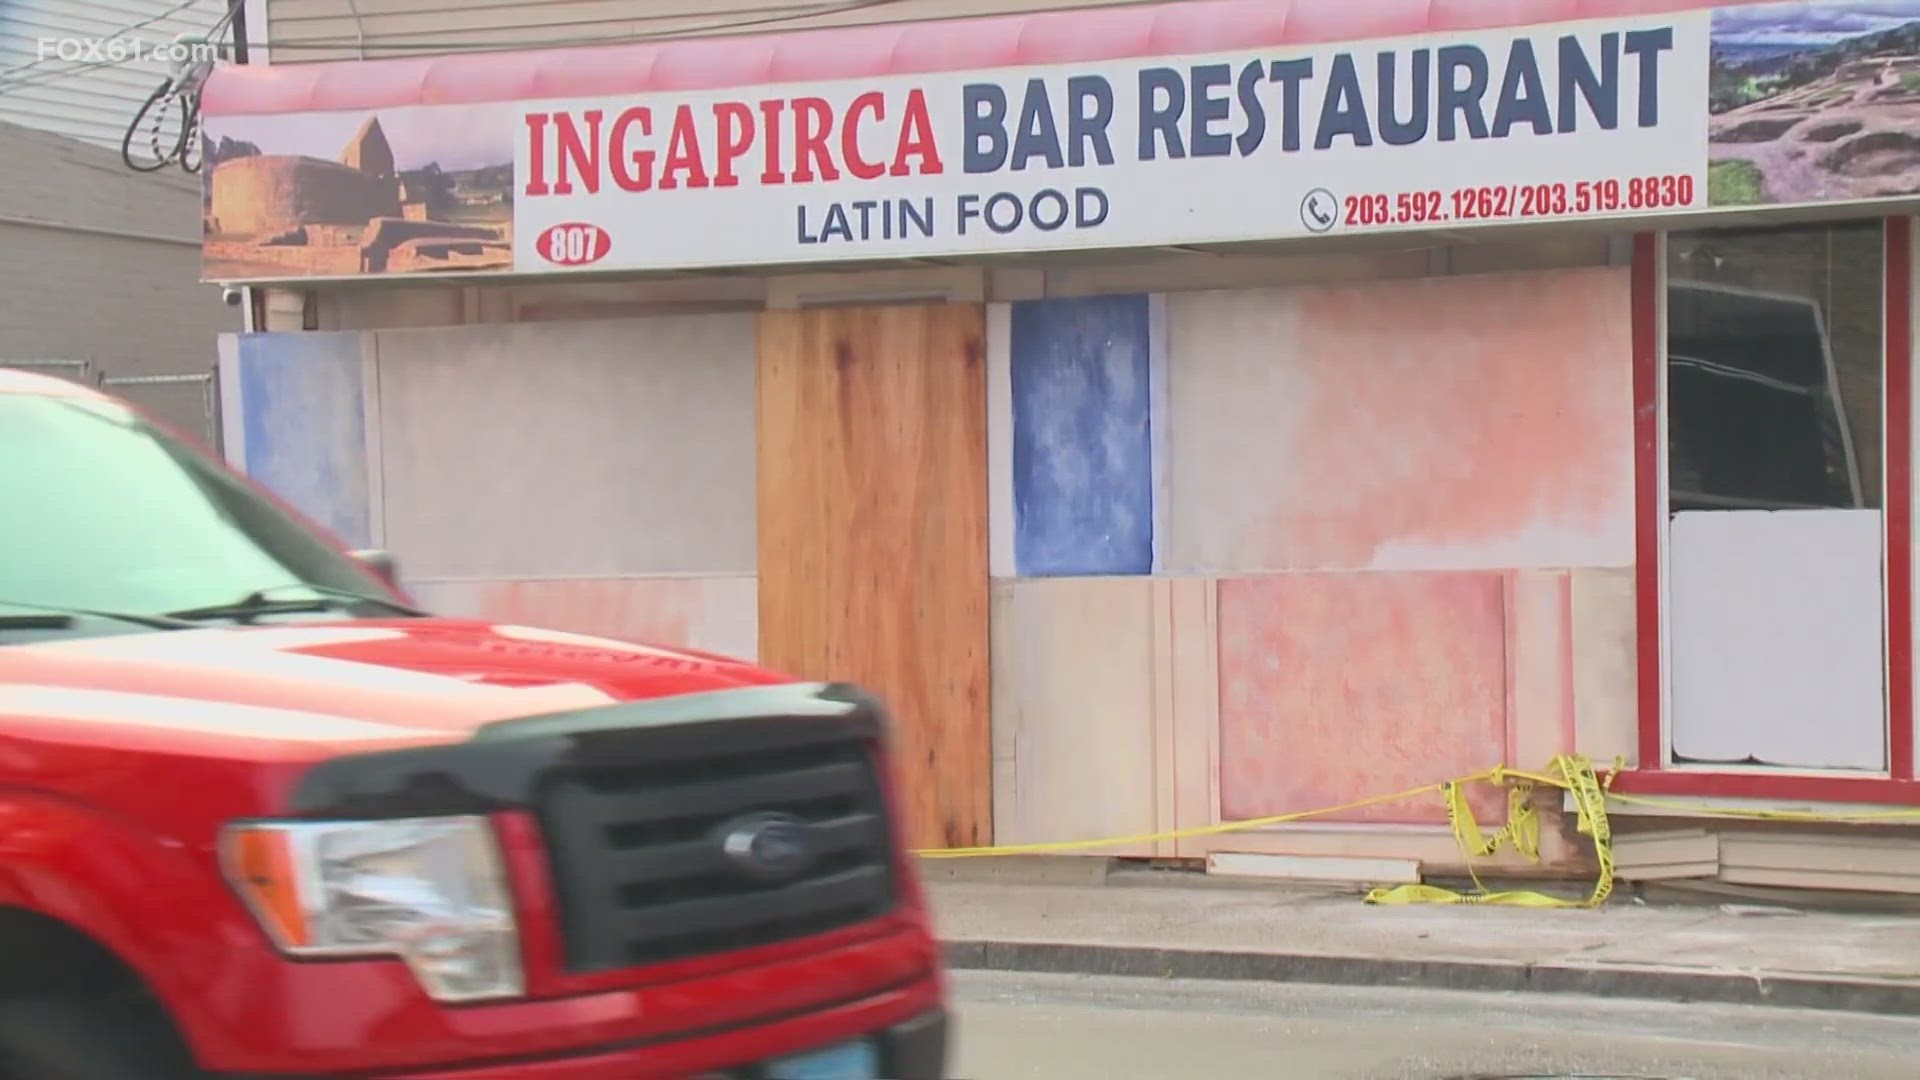 Jose Gavilanes is unsure if his business will re-open, but police told him the investigation will take some time.